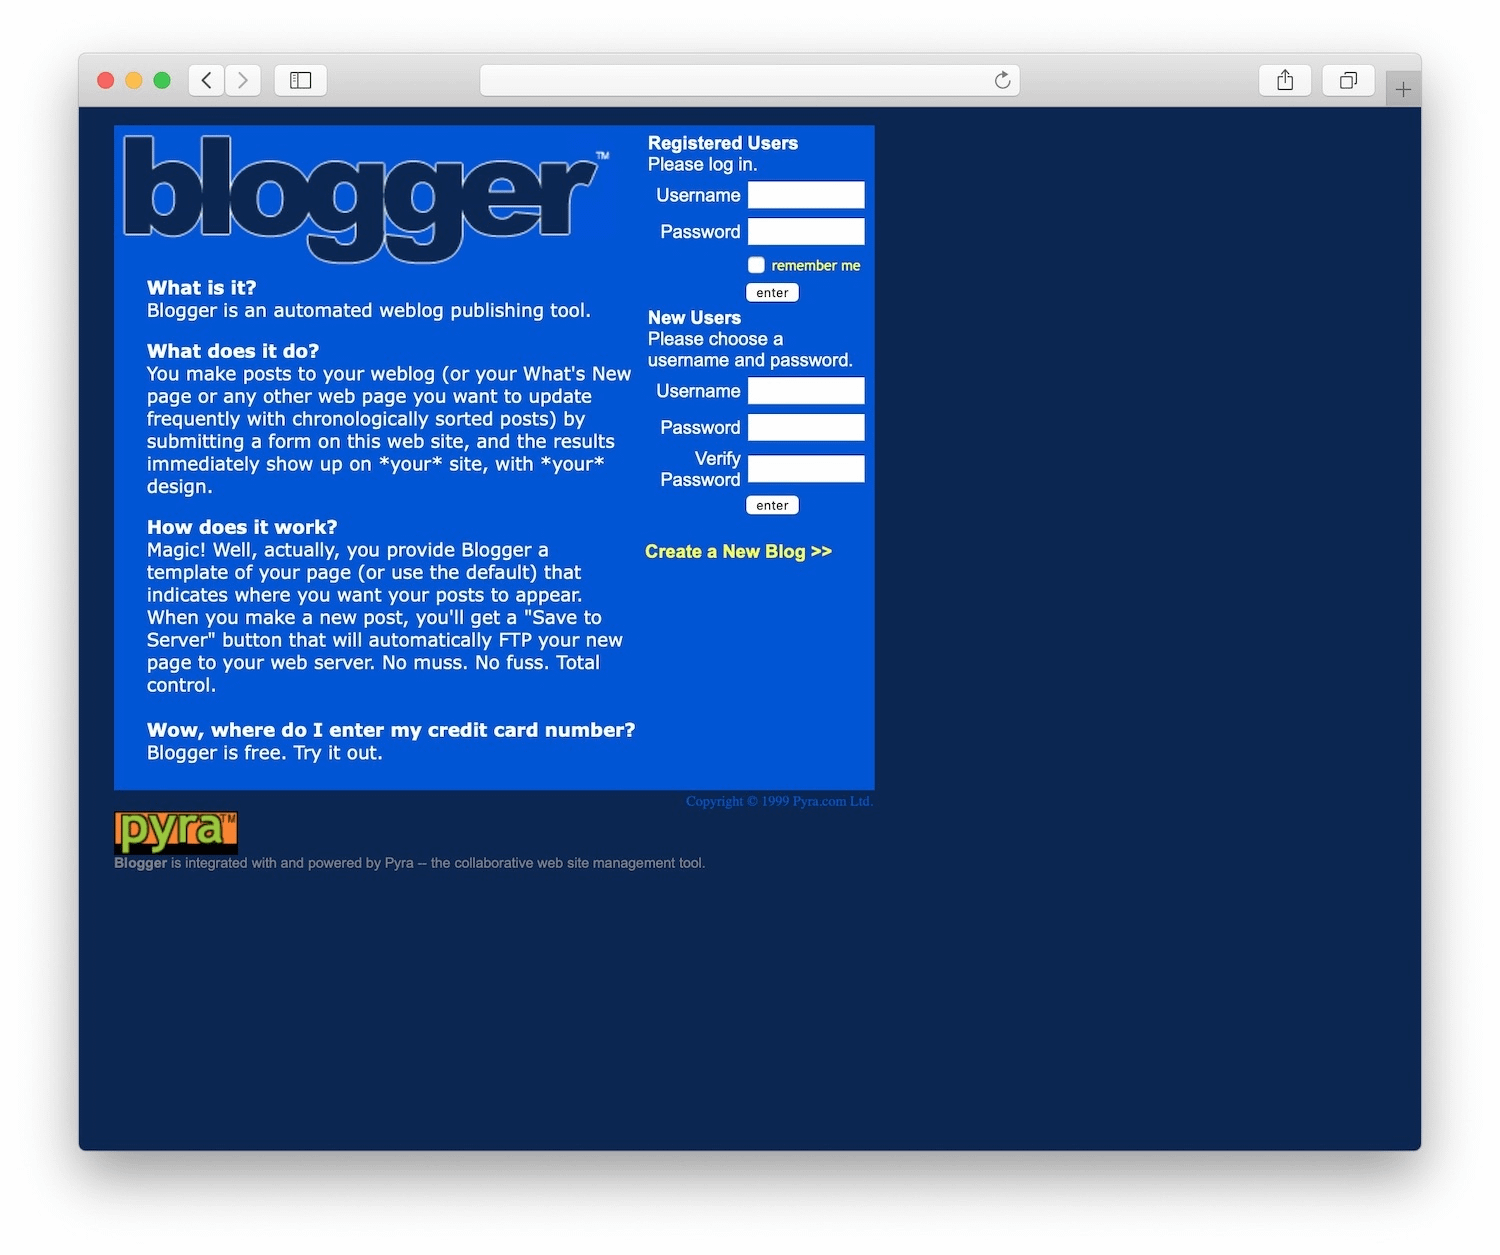 blogger was a blogging platform acquired by Google